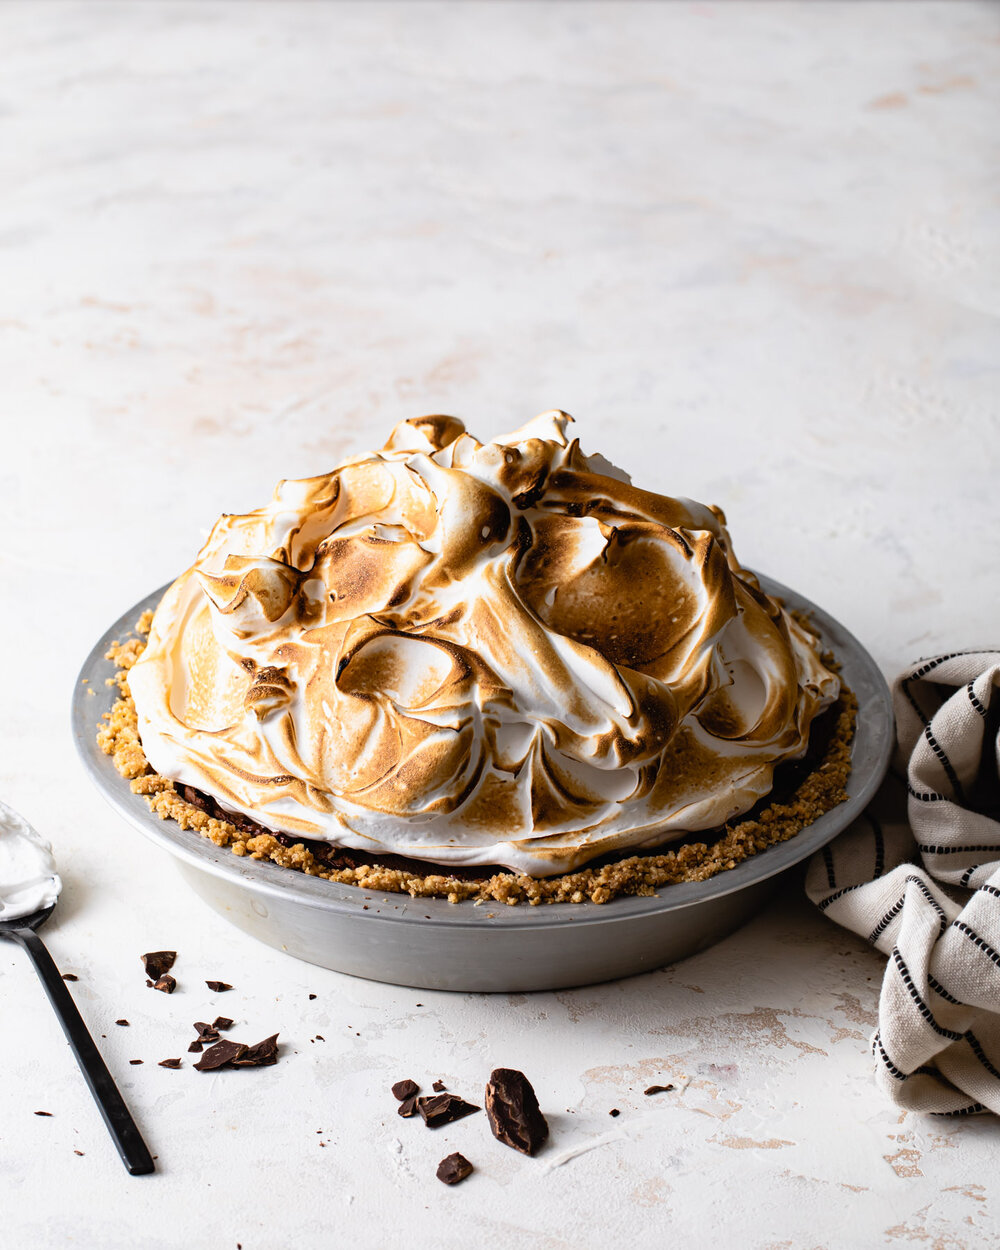 Peanut butter s’mores pie with chocolate peanut butter mousse filling and toasted meringue on top.